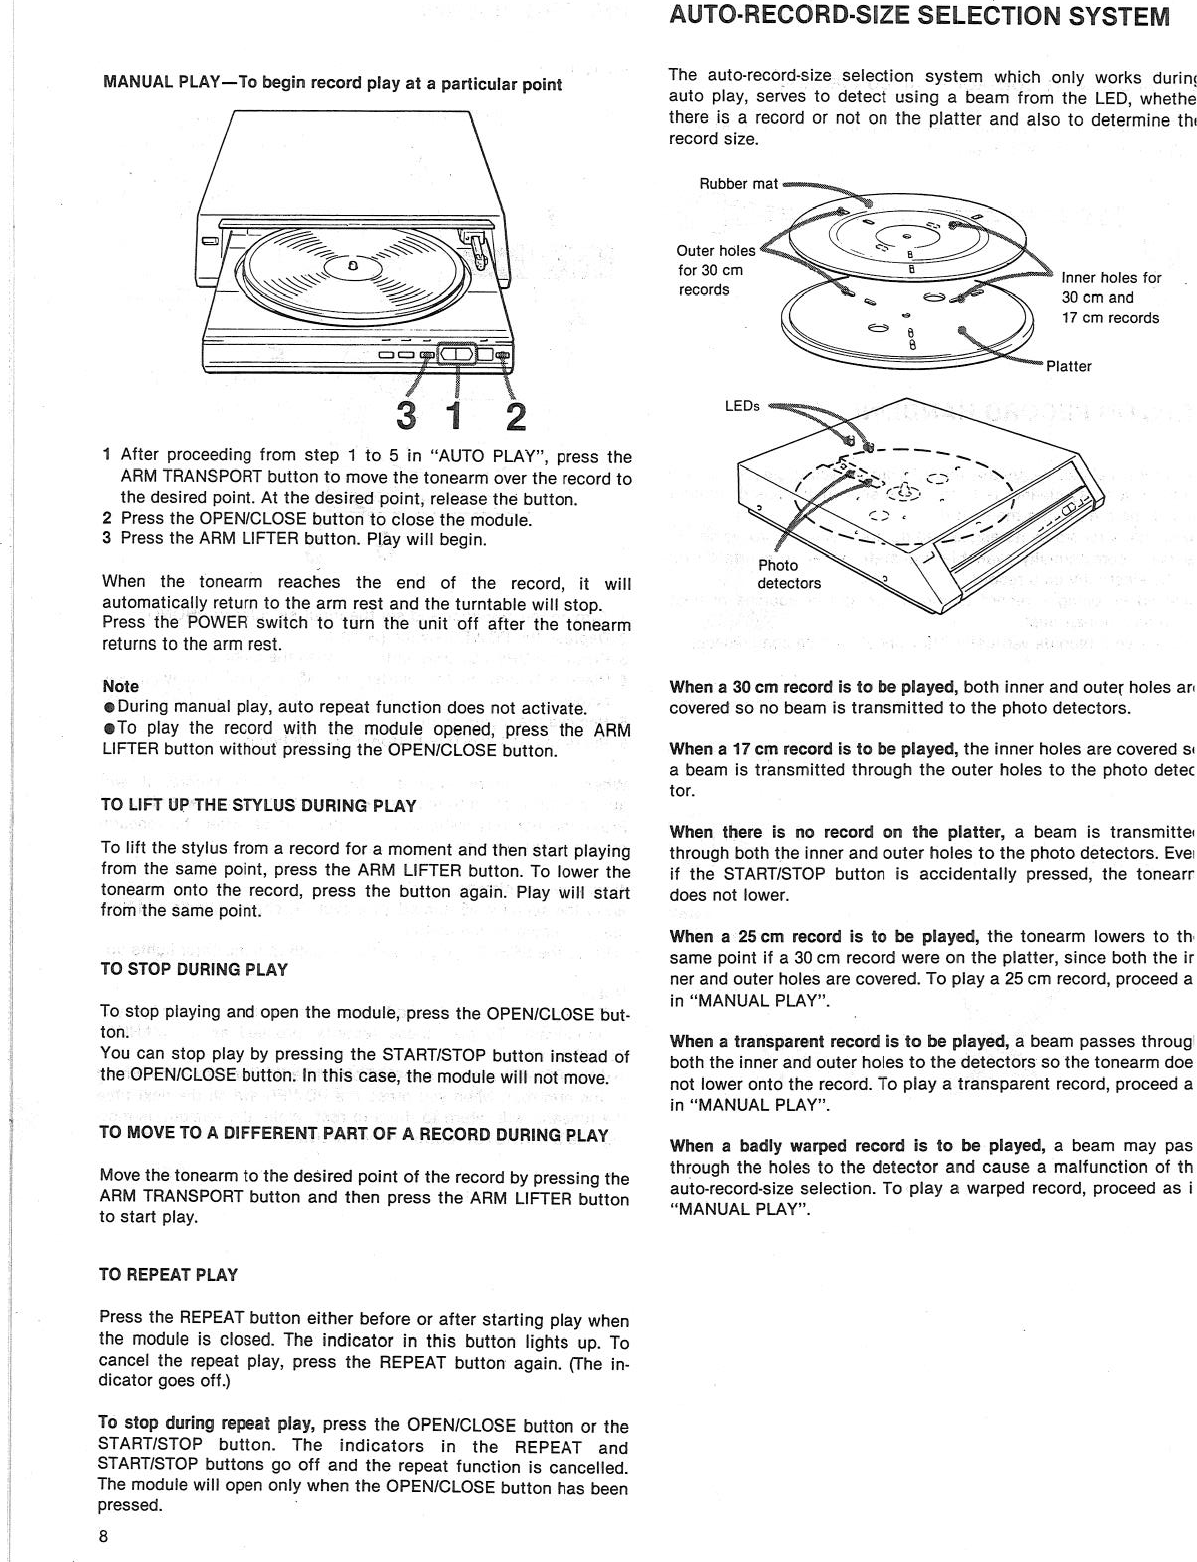 Page 8 of 11 - Sony Sony-Sony-Turntable-Ps-Fl7-Ii-Users-Manual-  Sony-sony-turntable-ps-fl7-ii-users-manual